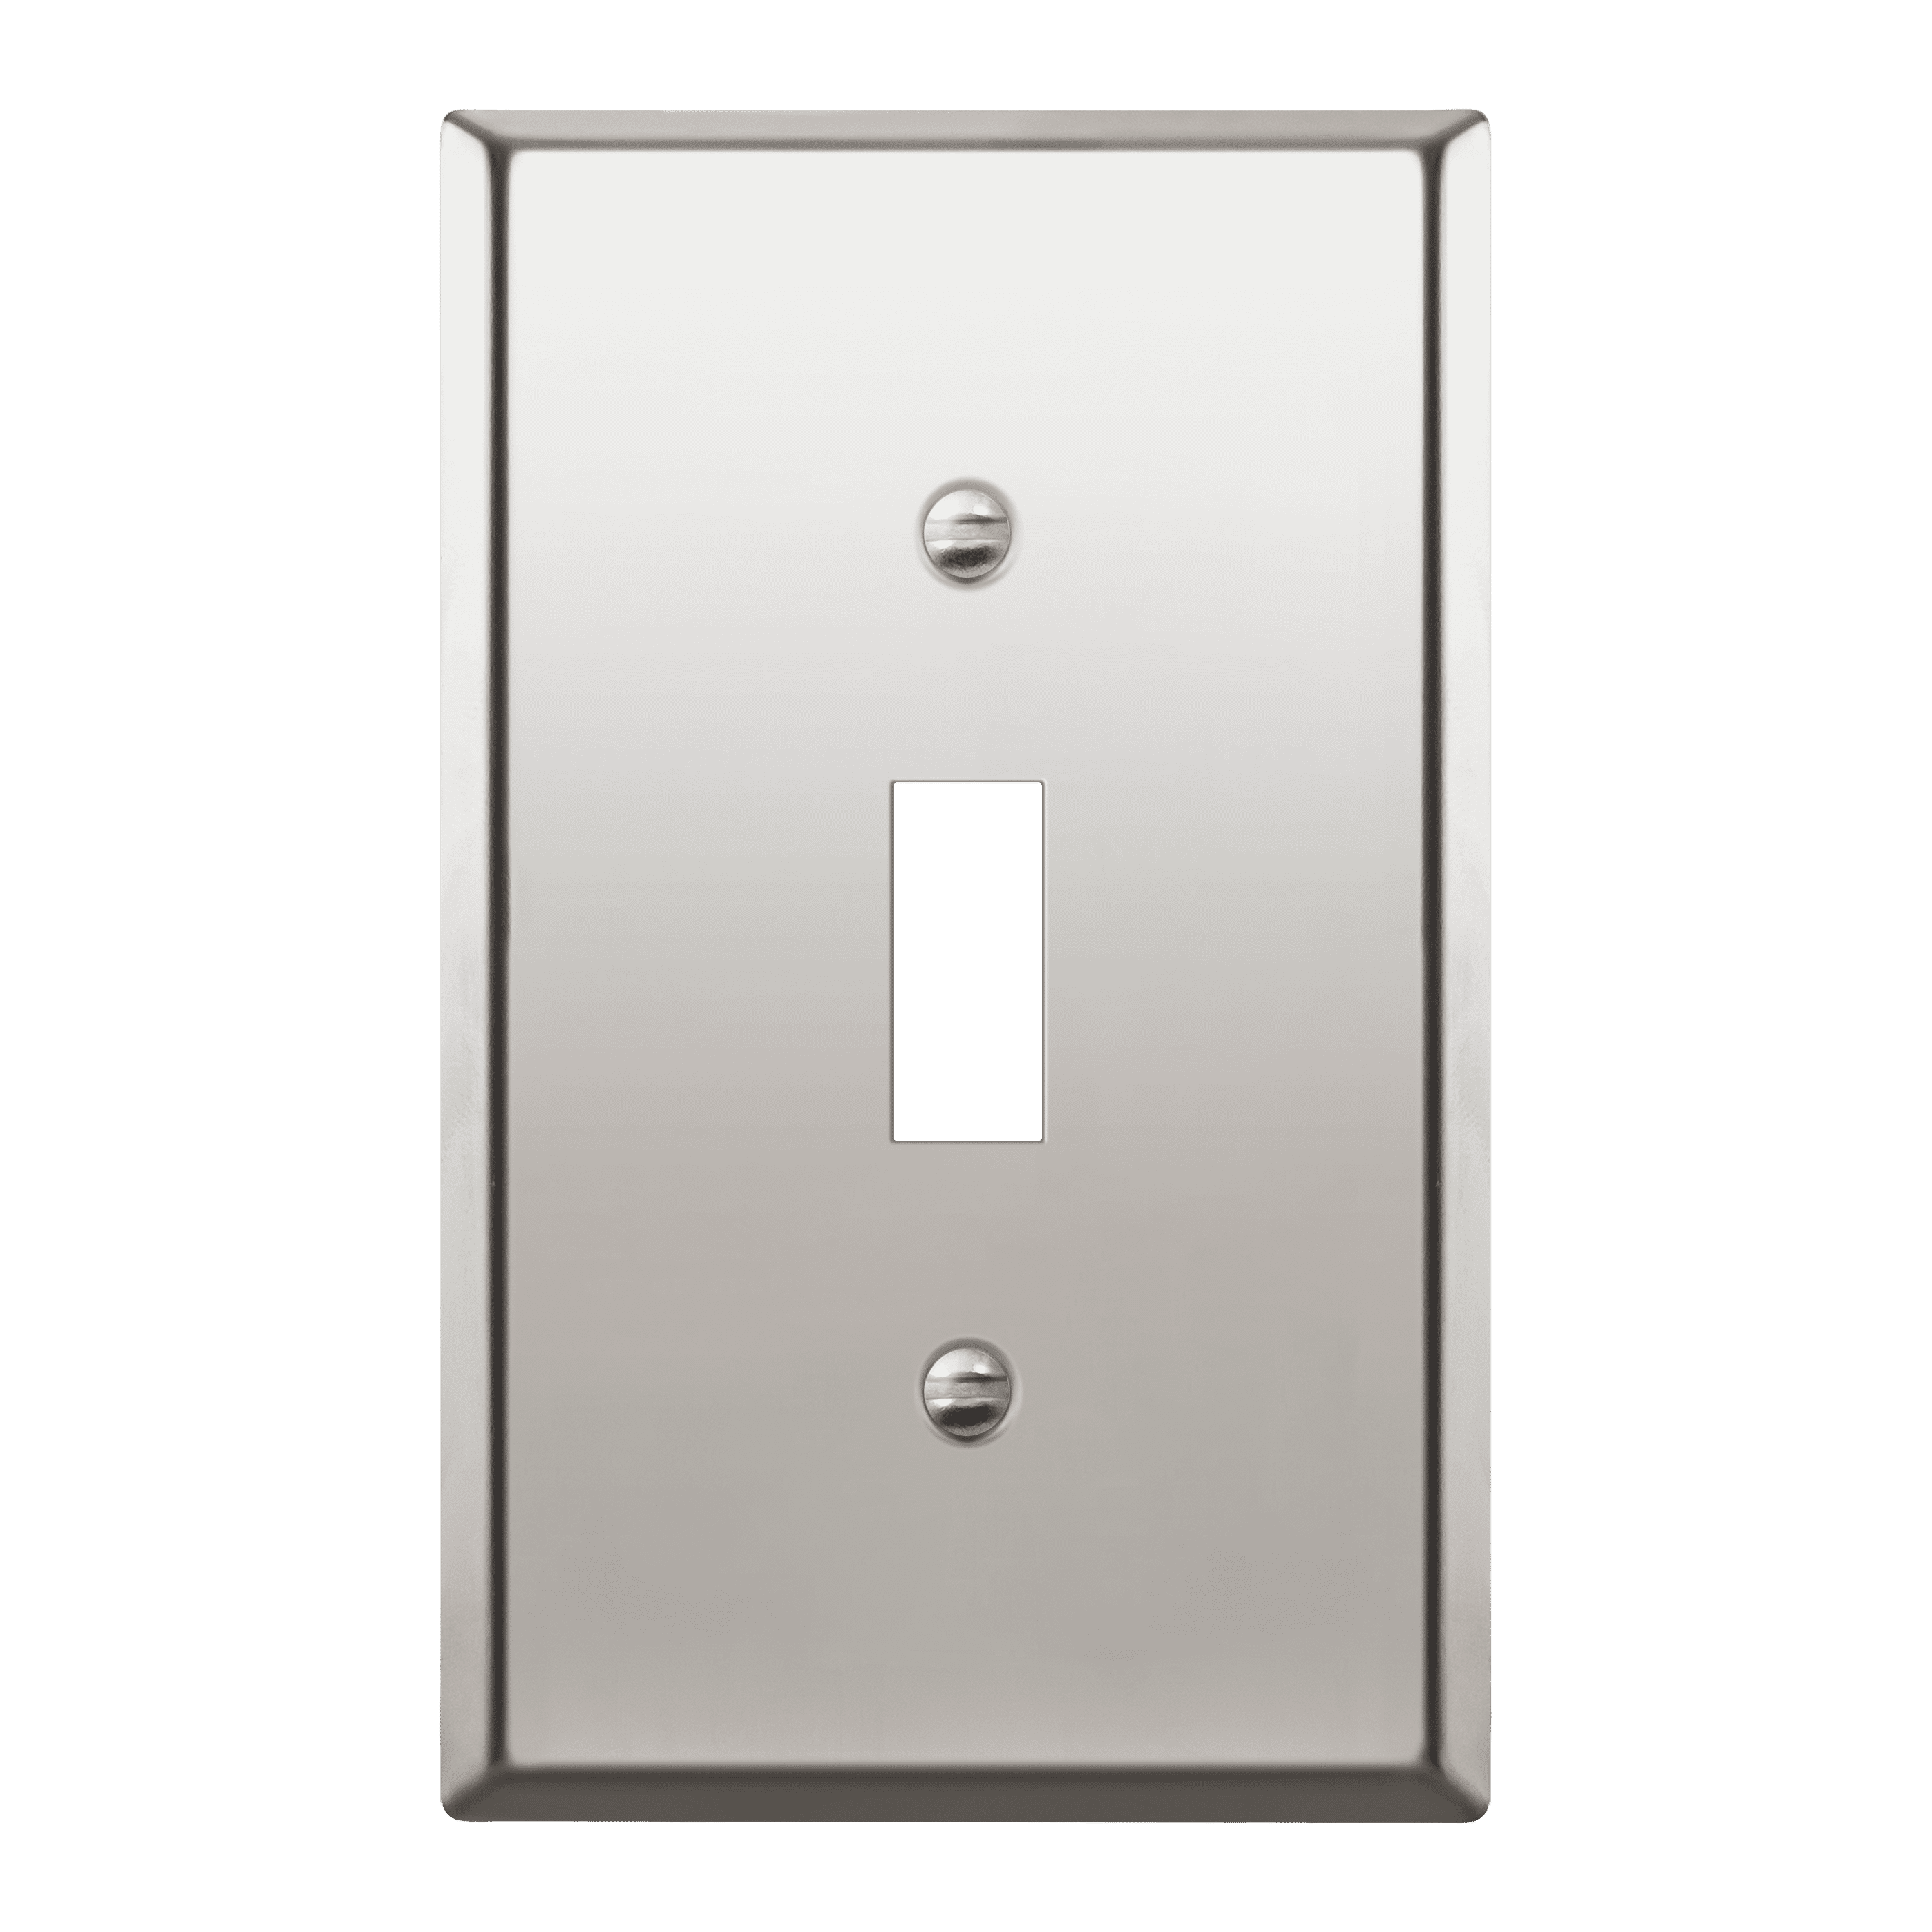 Light Panel Cover Orange Stripes Leaf Single Outlet Wall Plate/Panel Plate/Cover 1-Gang Device Receptacle Wallplate 